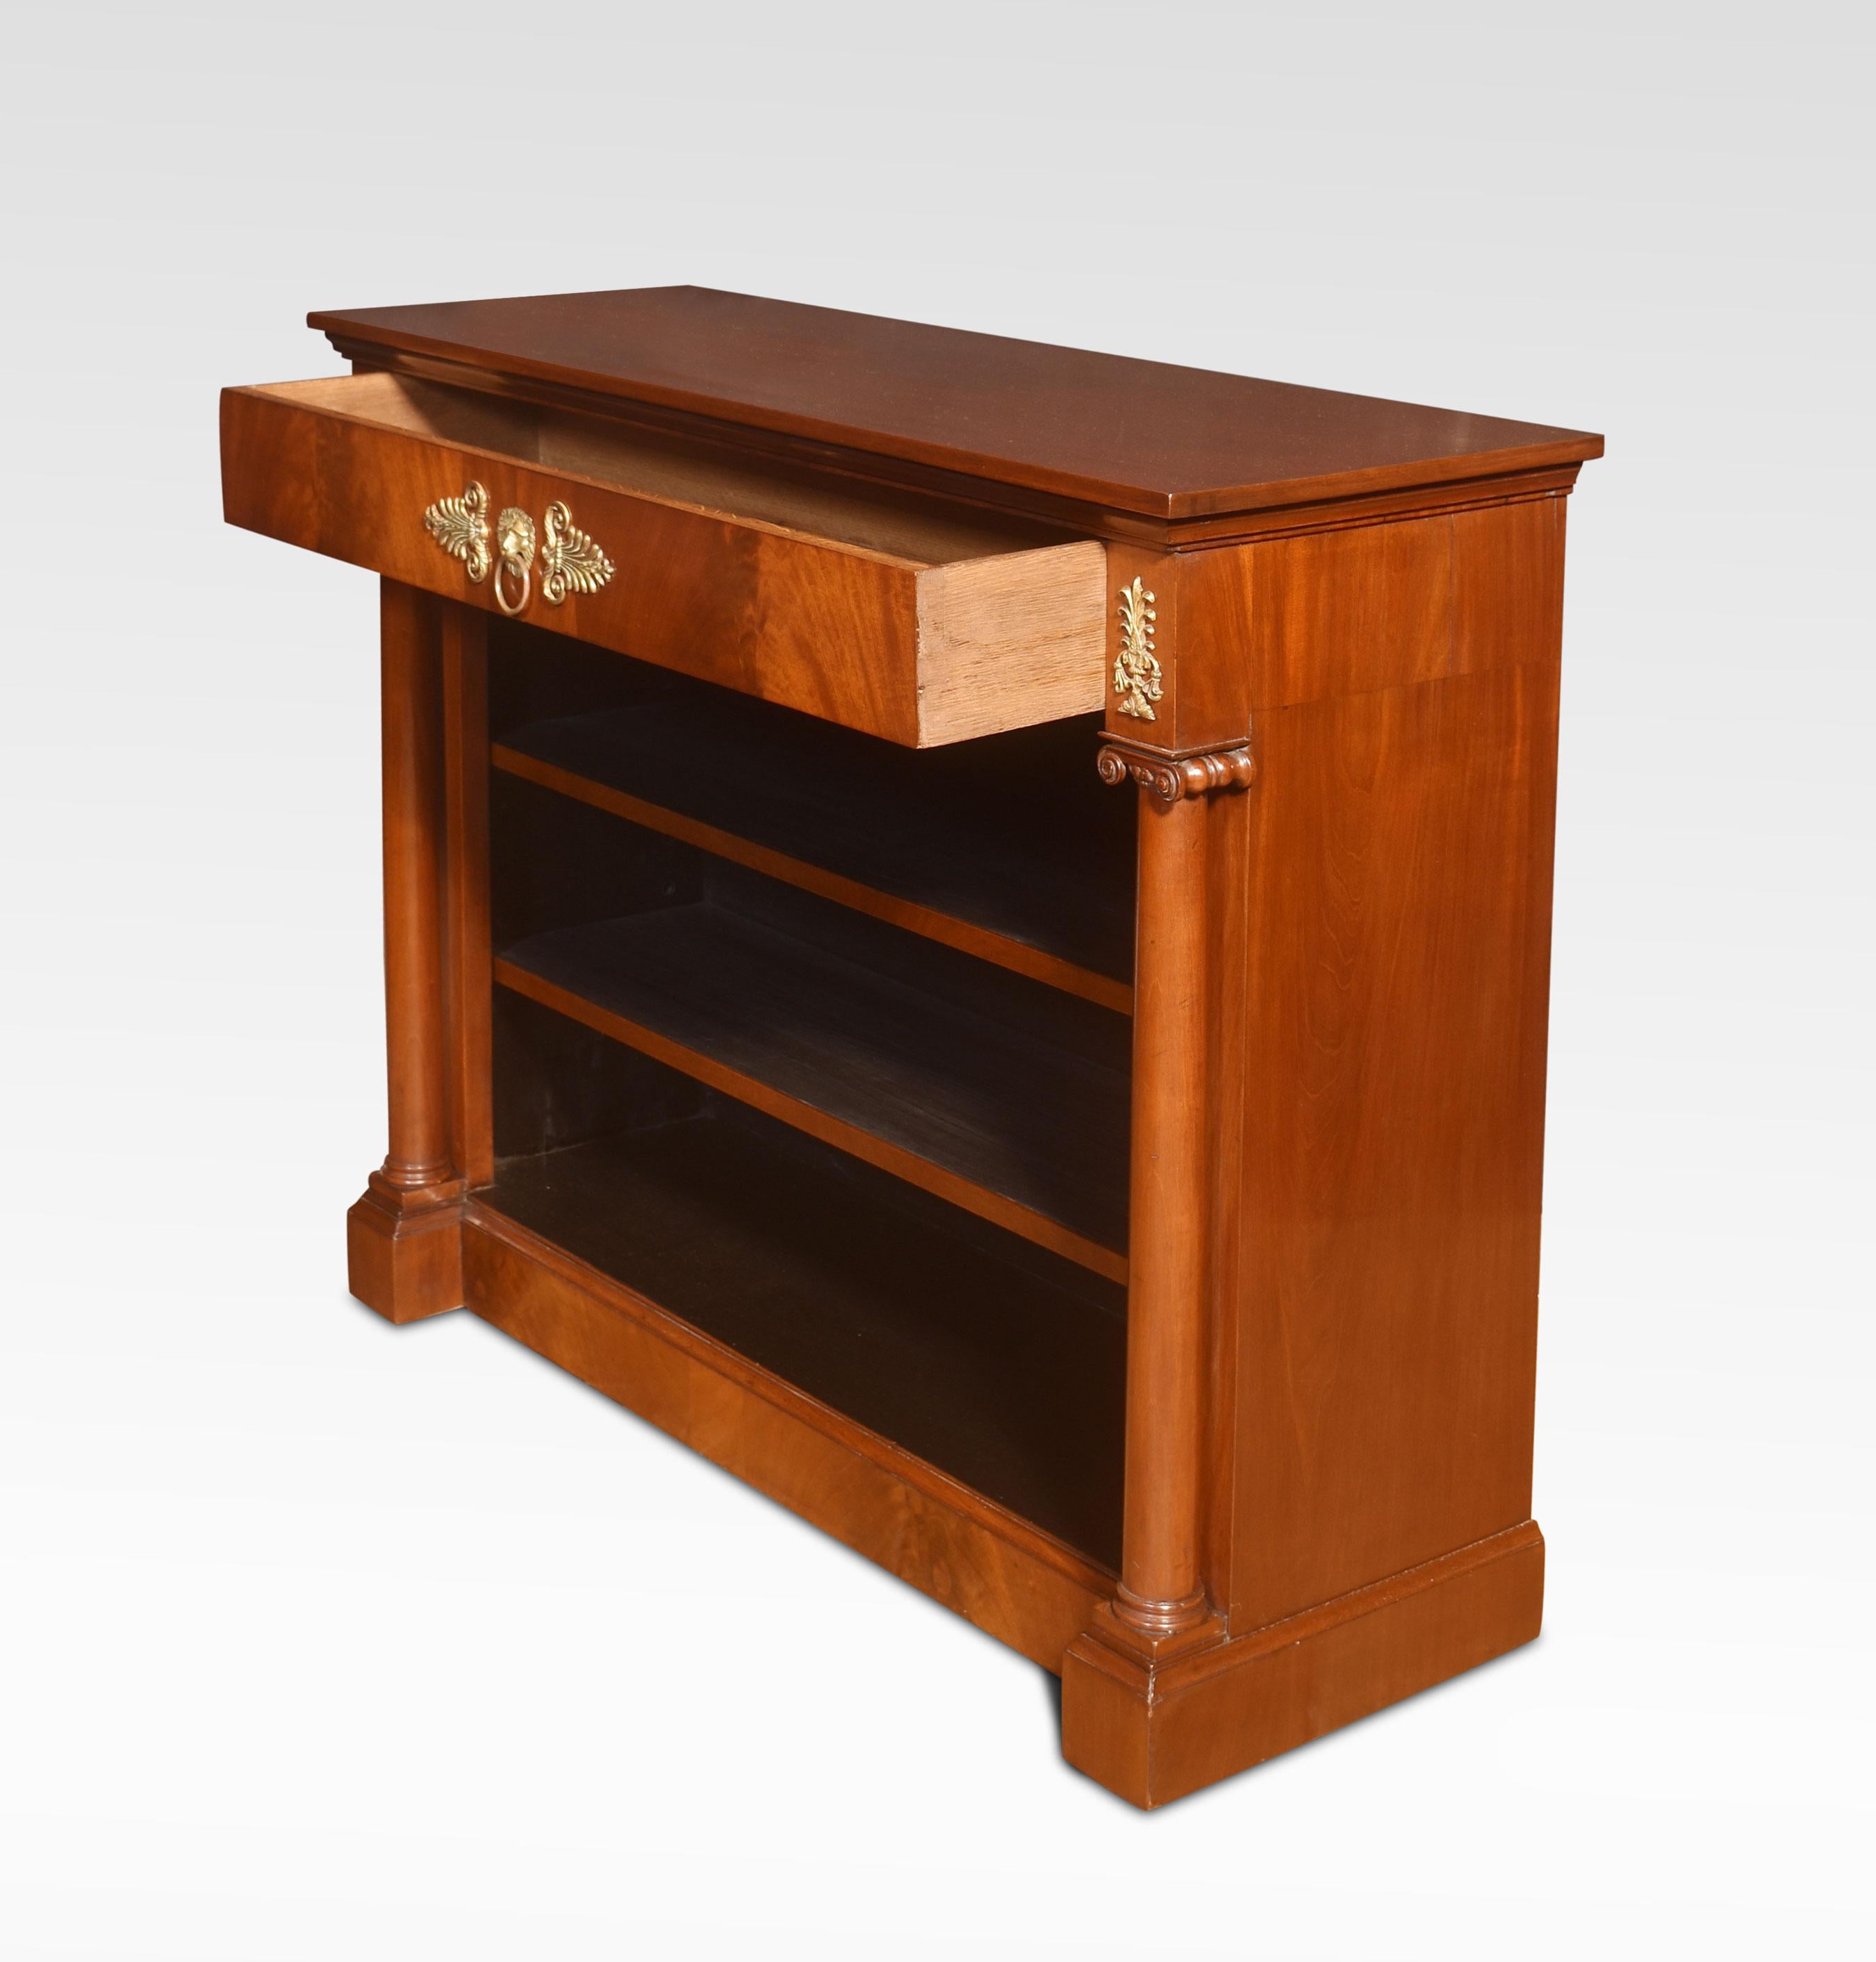 Wood Empire style open bookcase